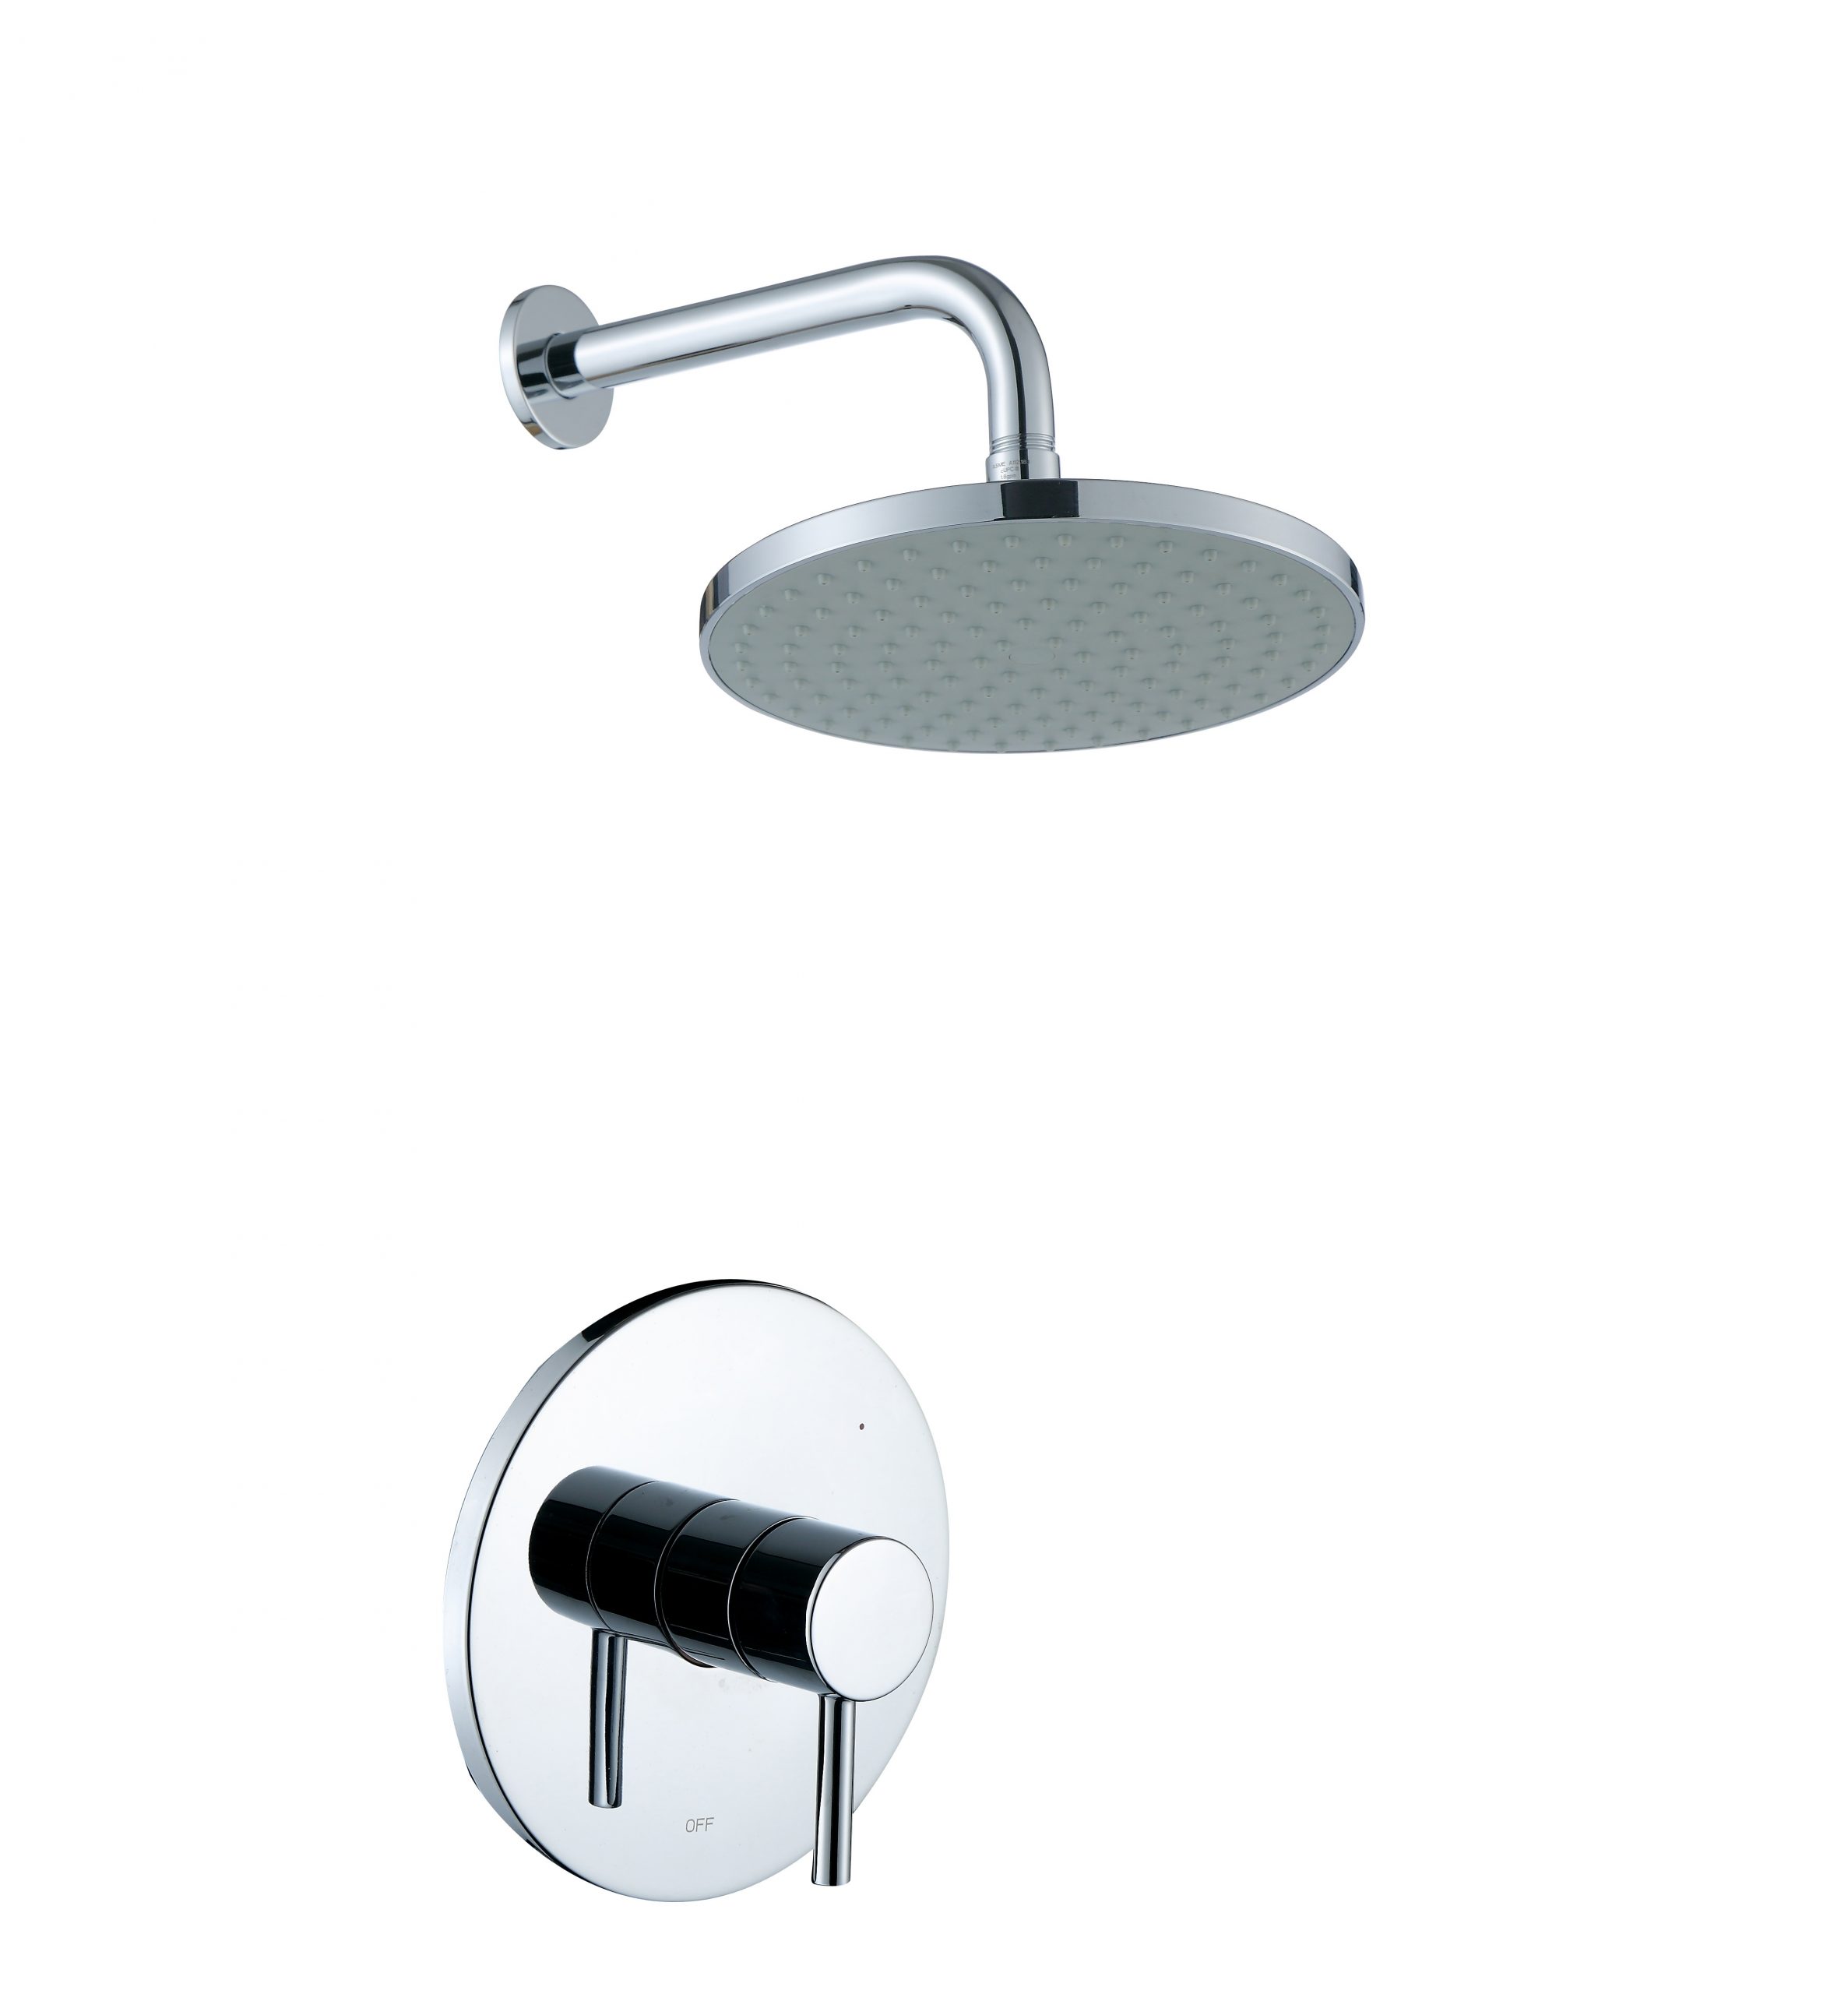 Ultra Faucets UF79600 Z Tub and Shower Set Chrome Finish